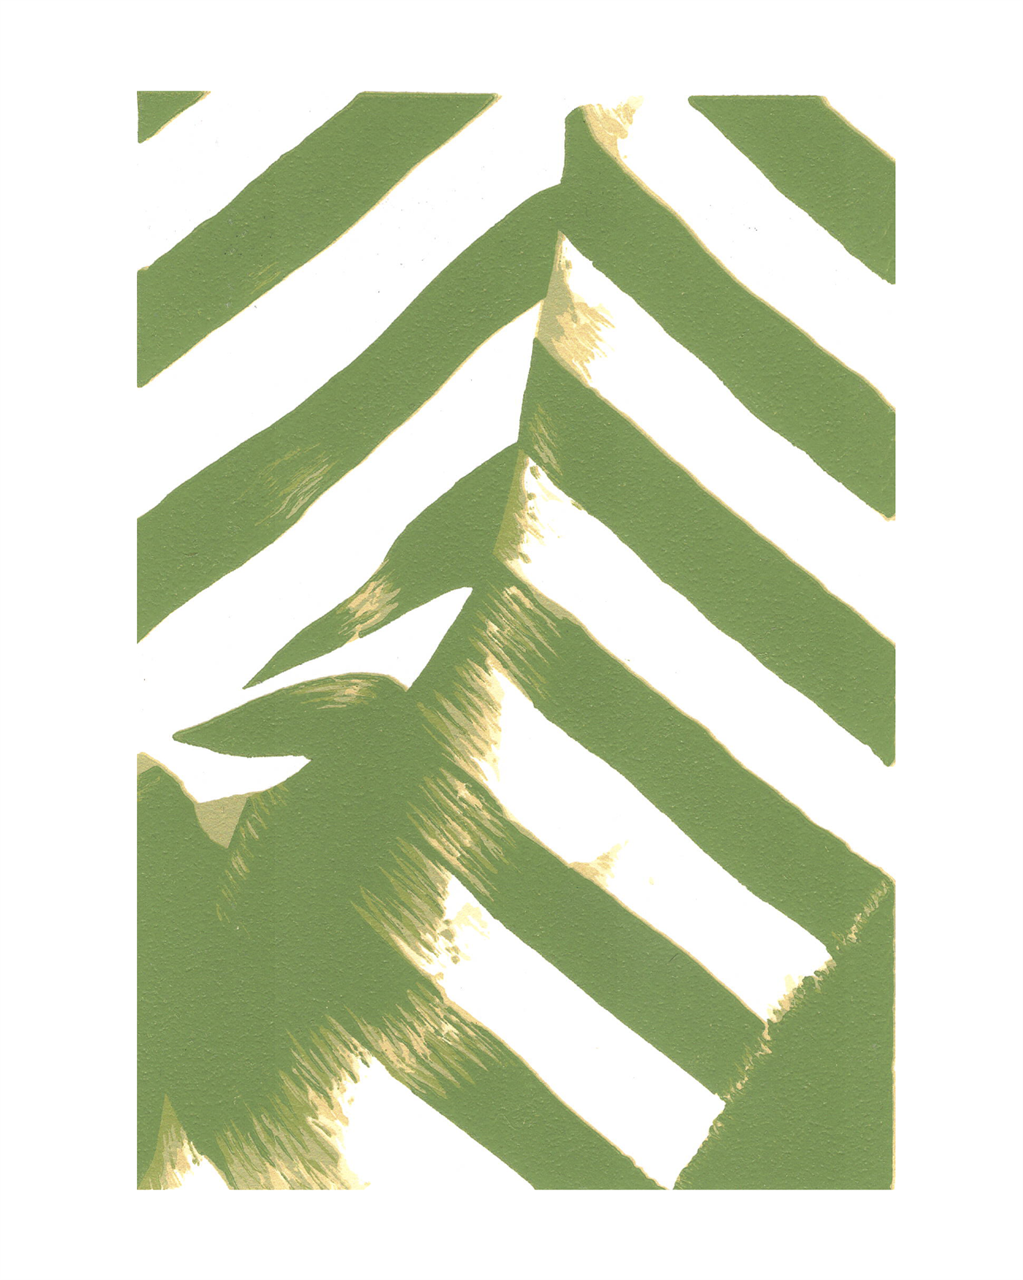 Reduction linocut print of a fabric with olive green stripes.